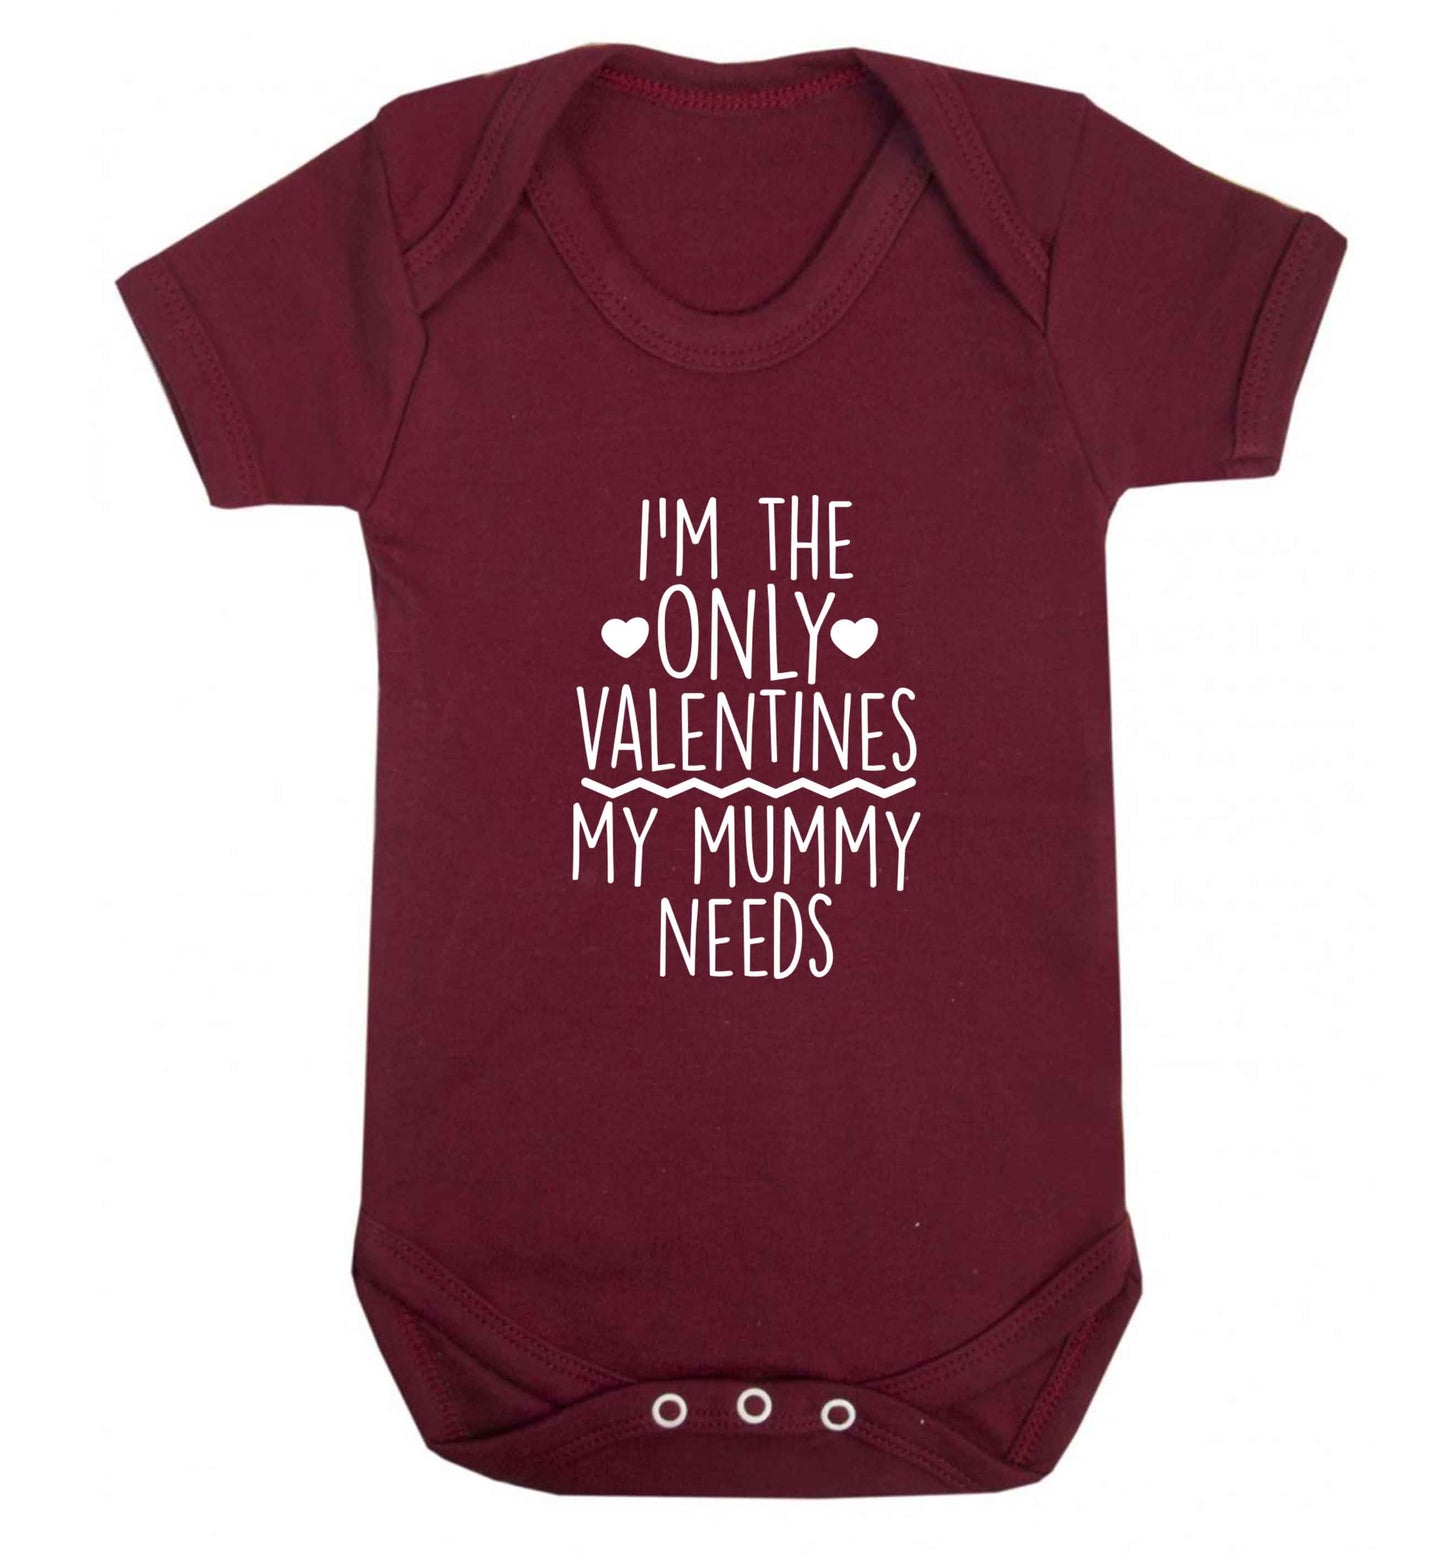 I'm the only valentines my mummy needs baby vest maroon 18-24 months